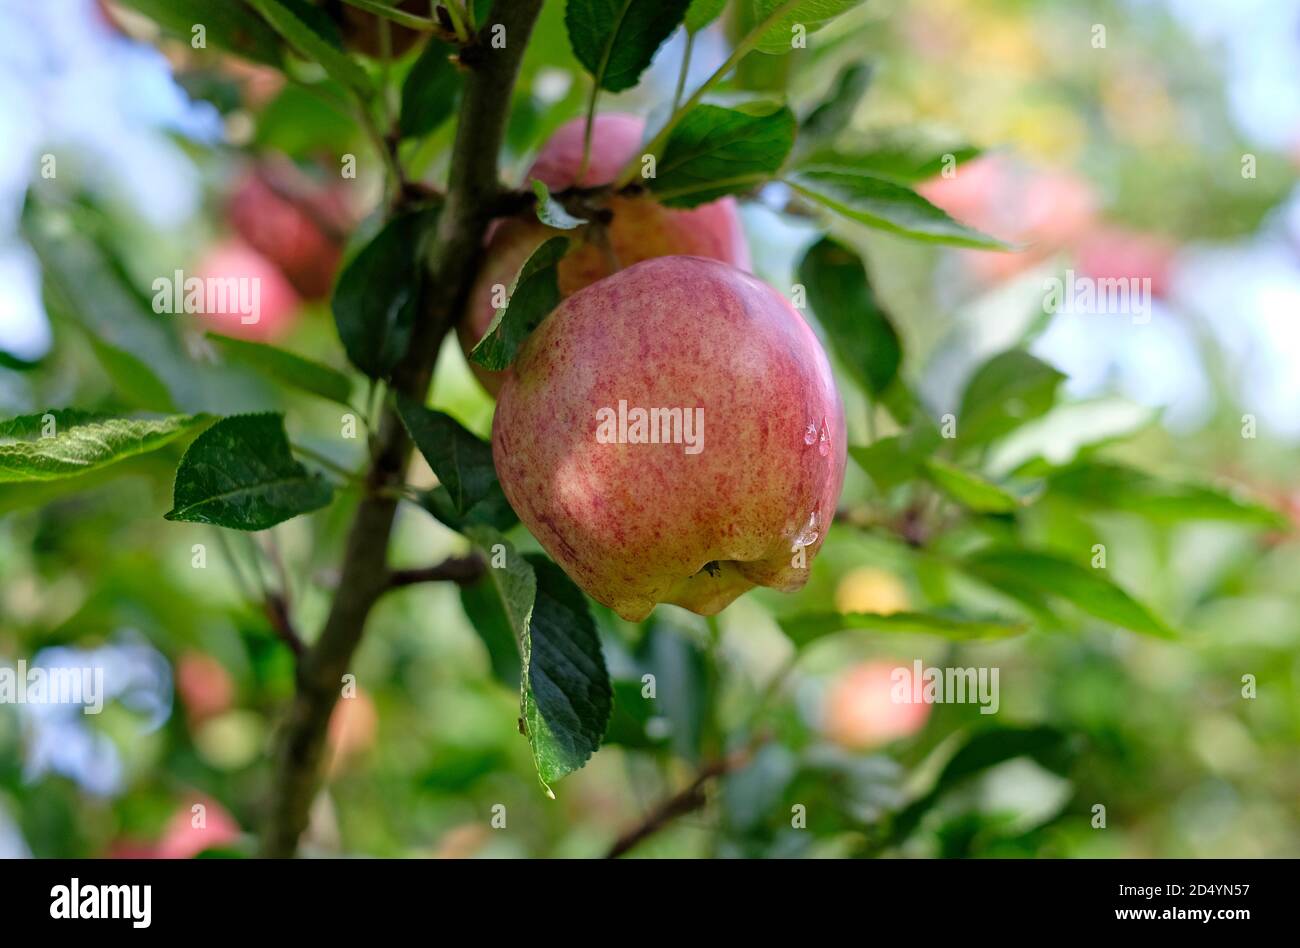 small red apple on tree in an english garden, herefordshire, england Stock Photo